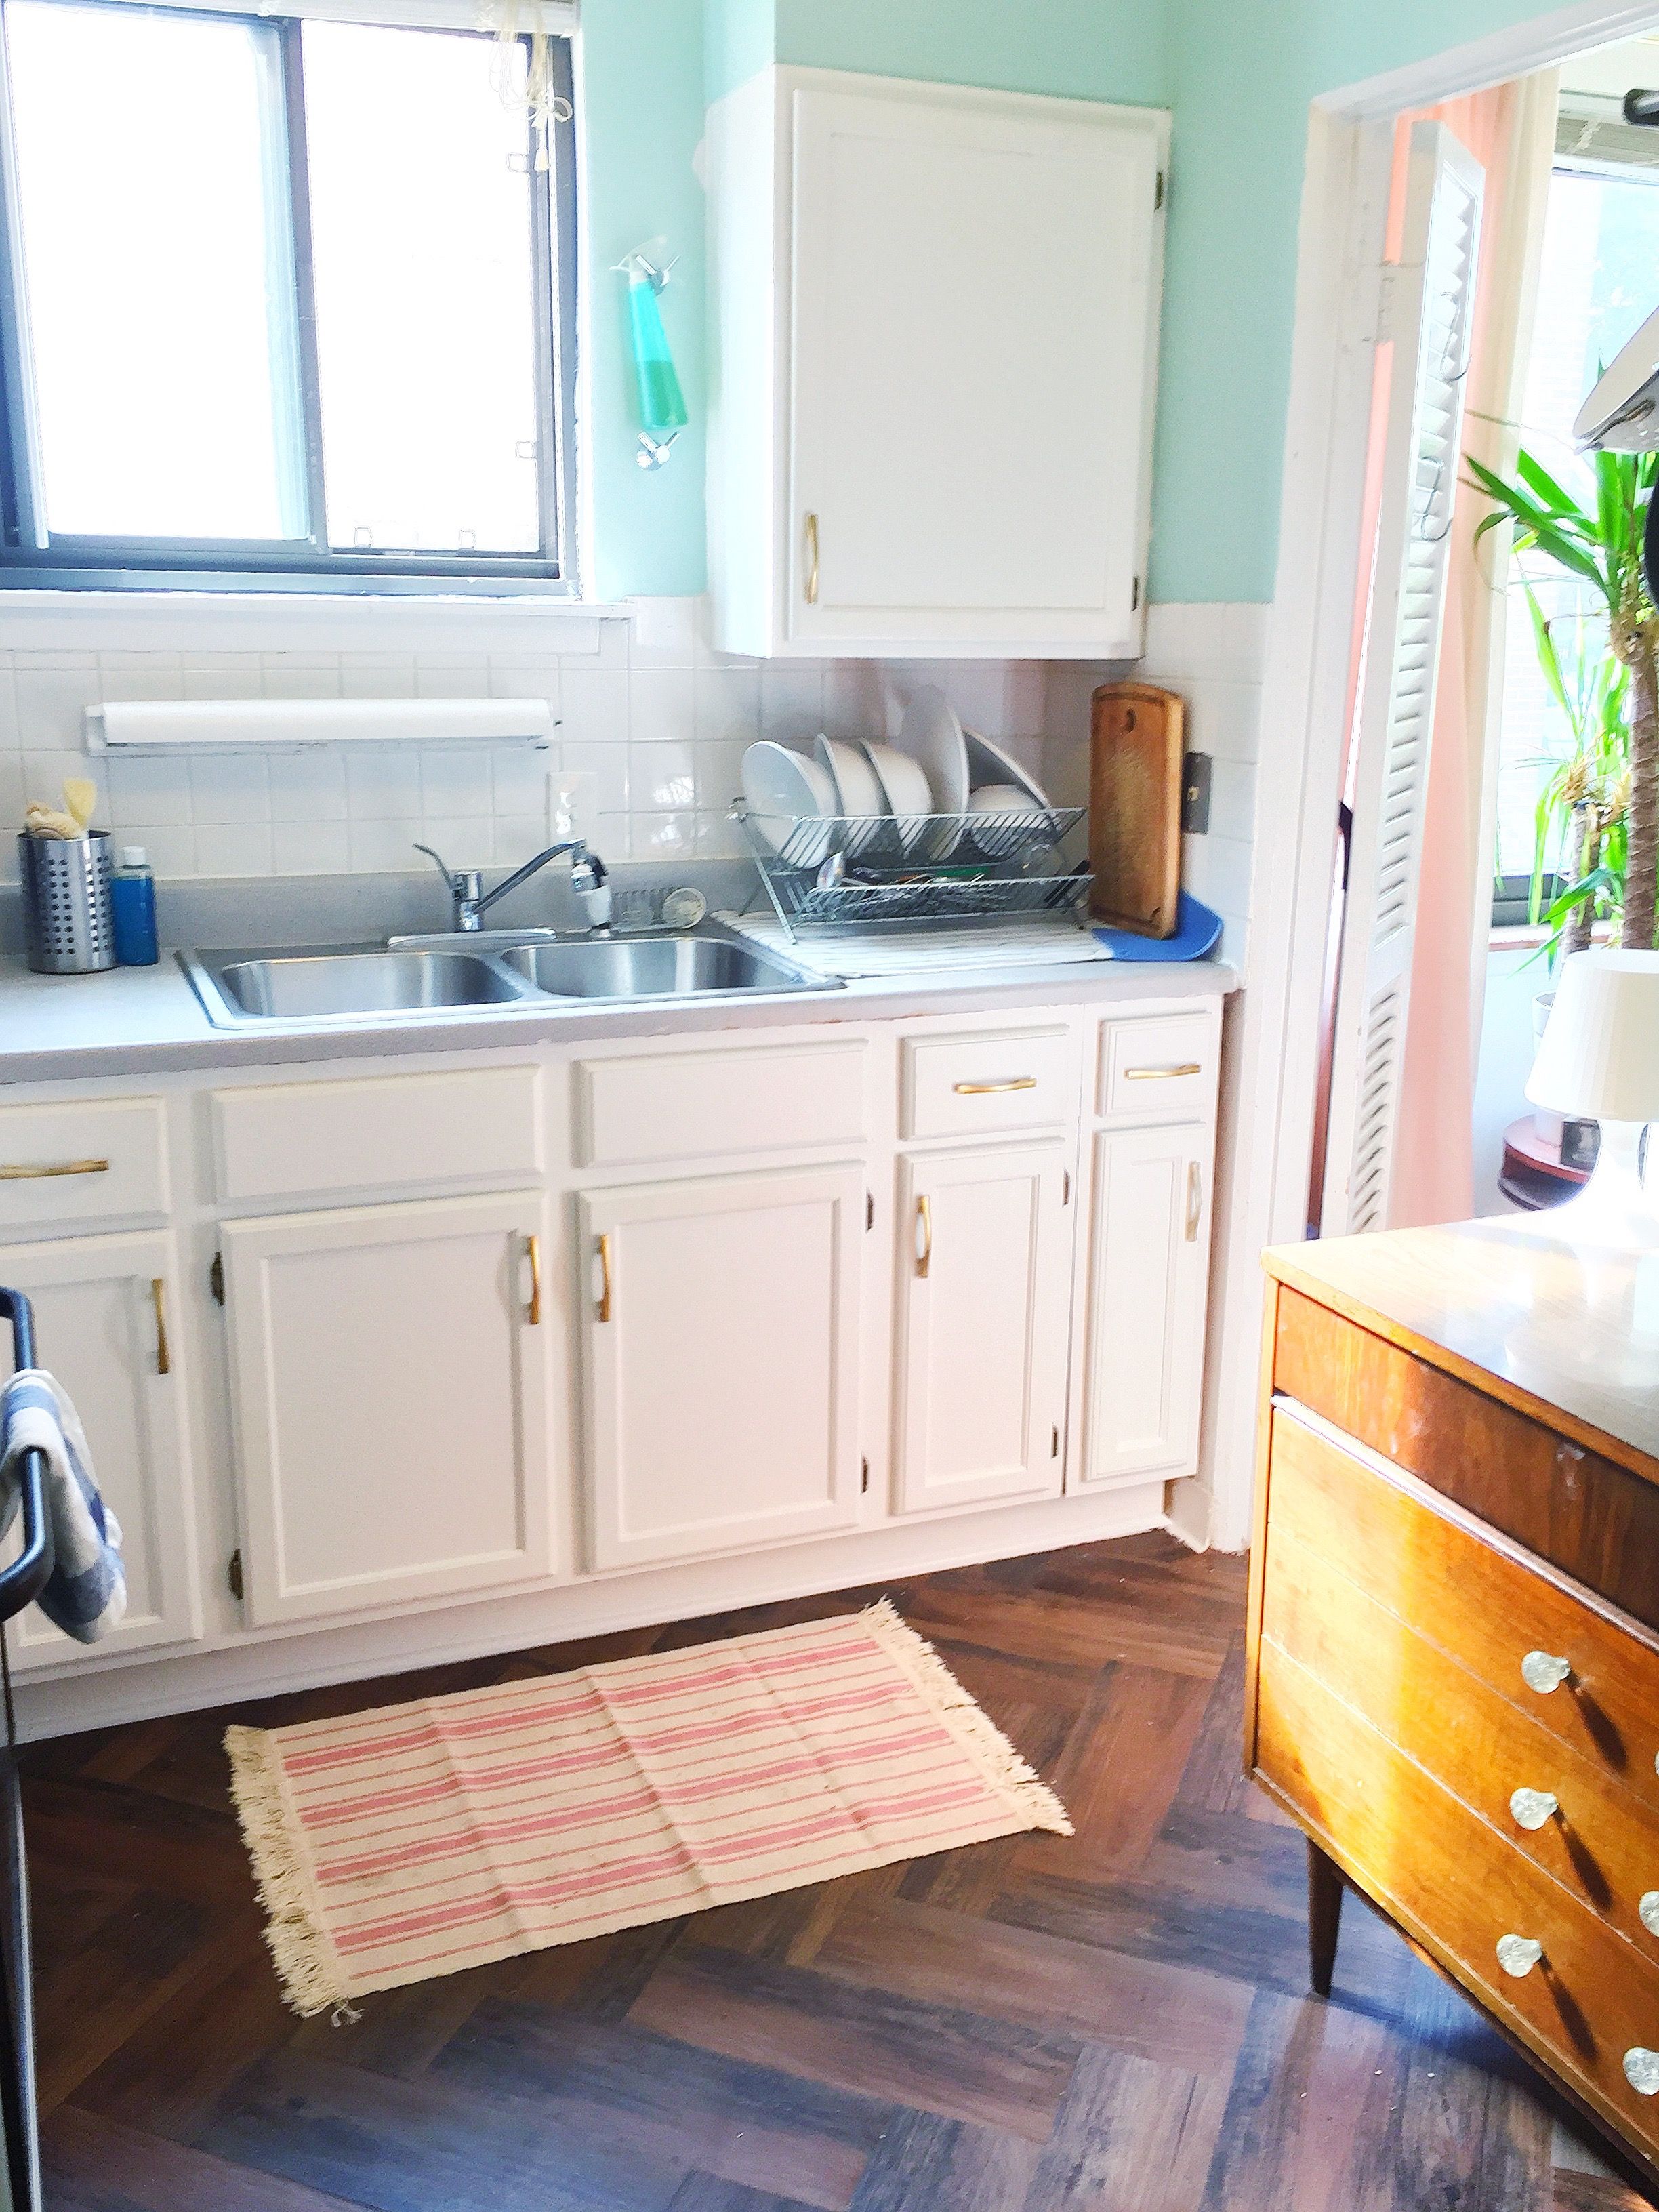 We Tried It: “The Home Edit” Kitchen Makeover (Budget: $100)